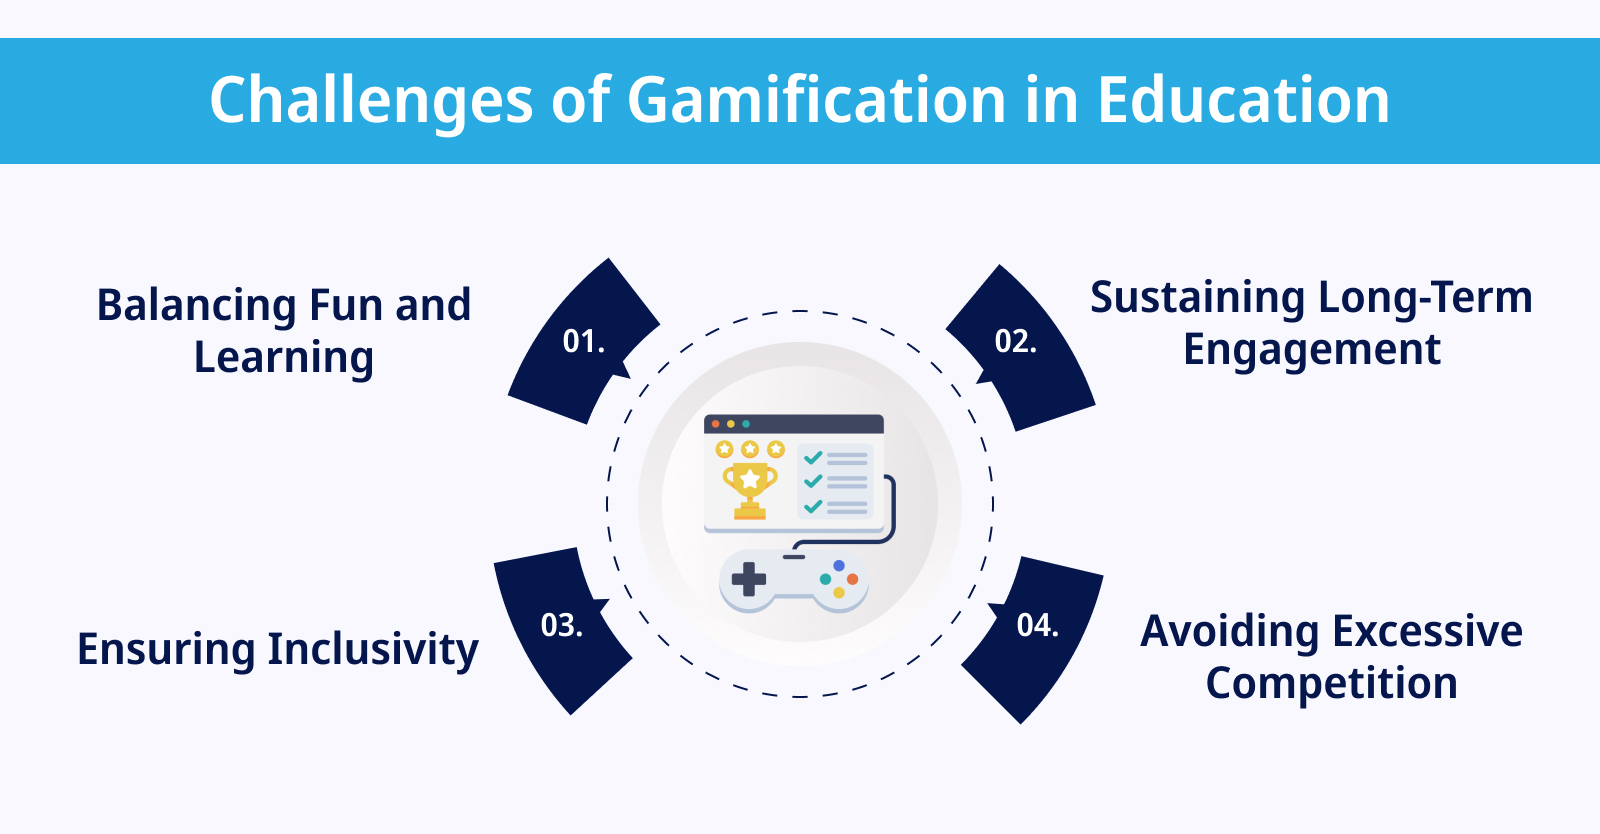 Challenges of Gamification in Education